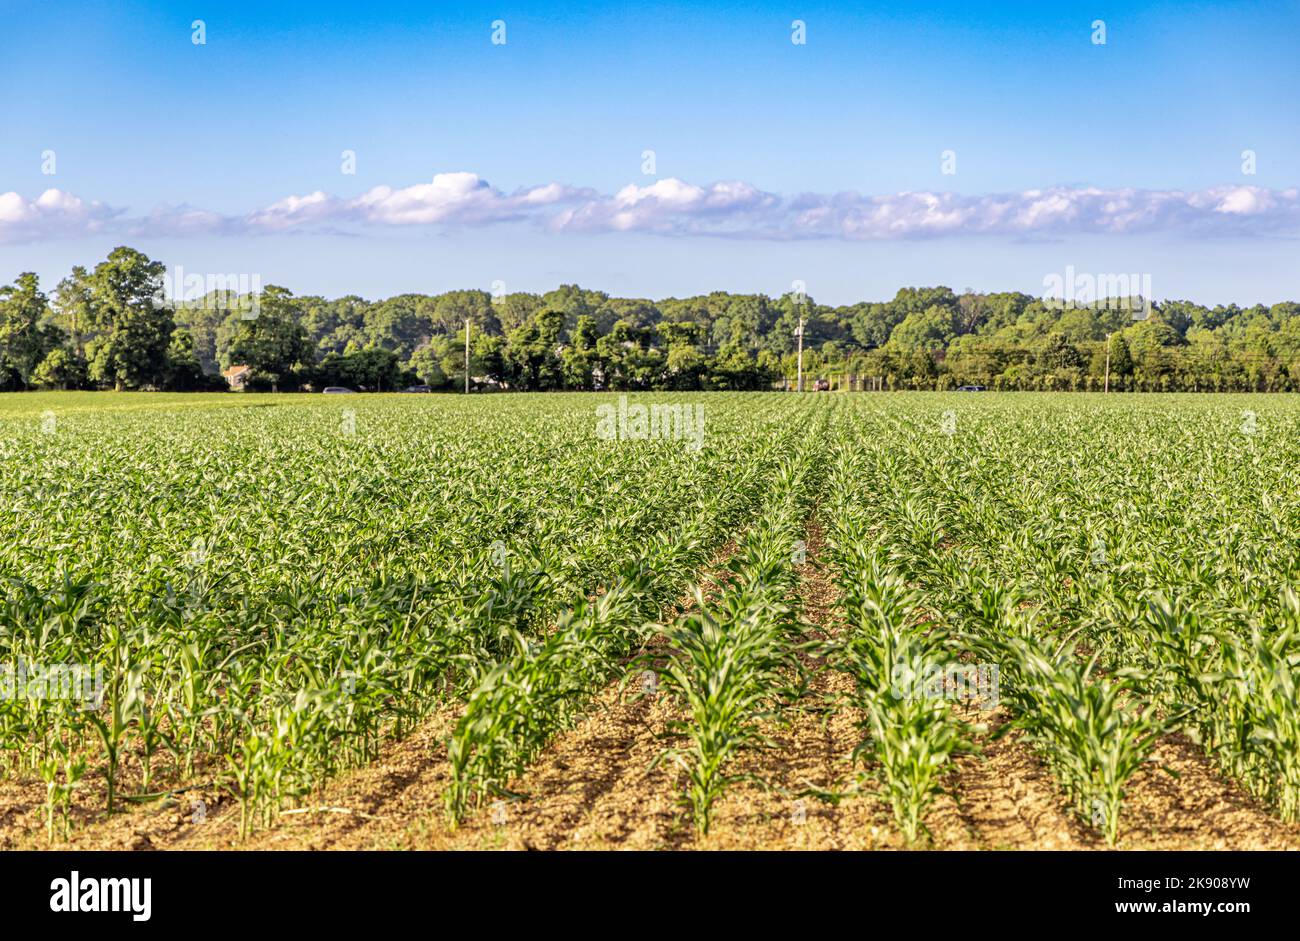 Section of field with young corn plants growing in rows Stock Photo